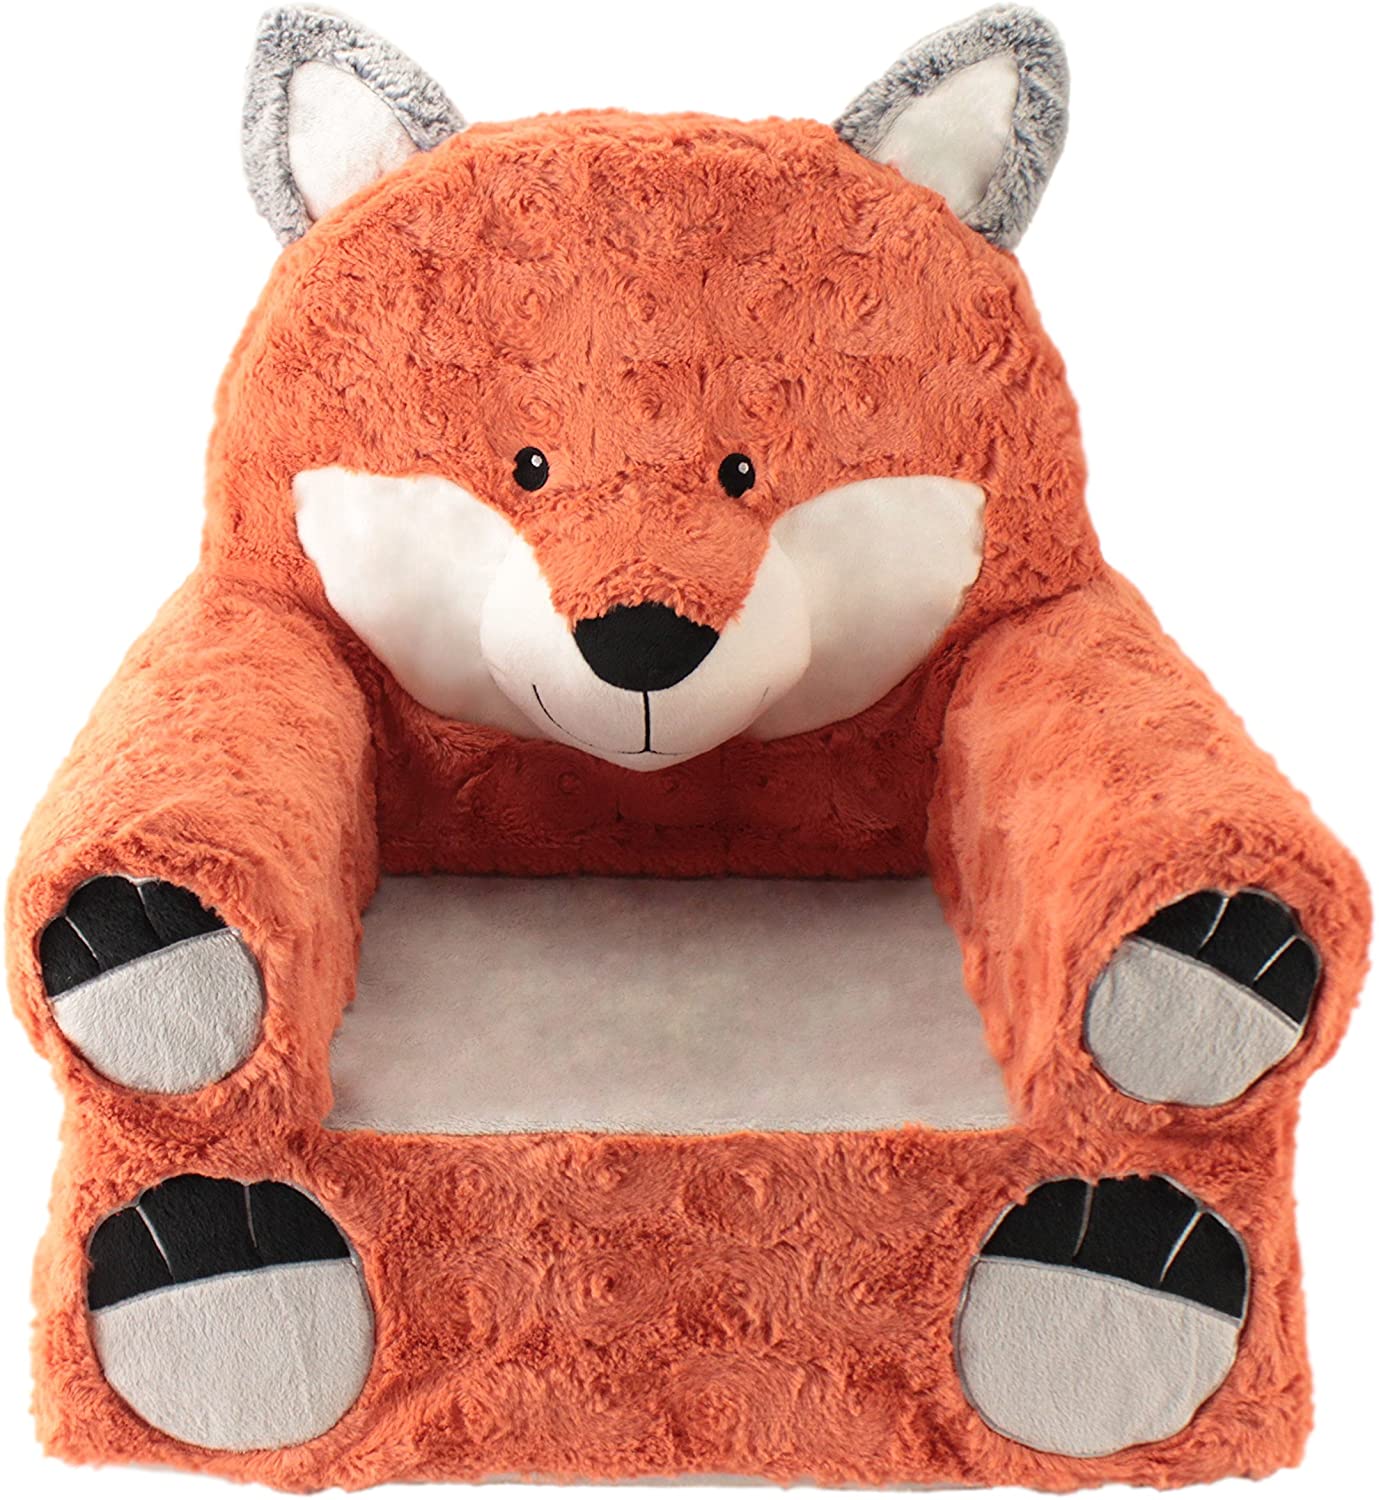 gifts-for-1-year-old-plush-chair